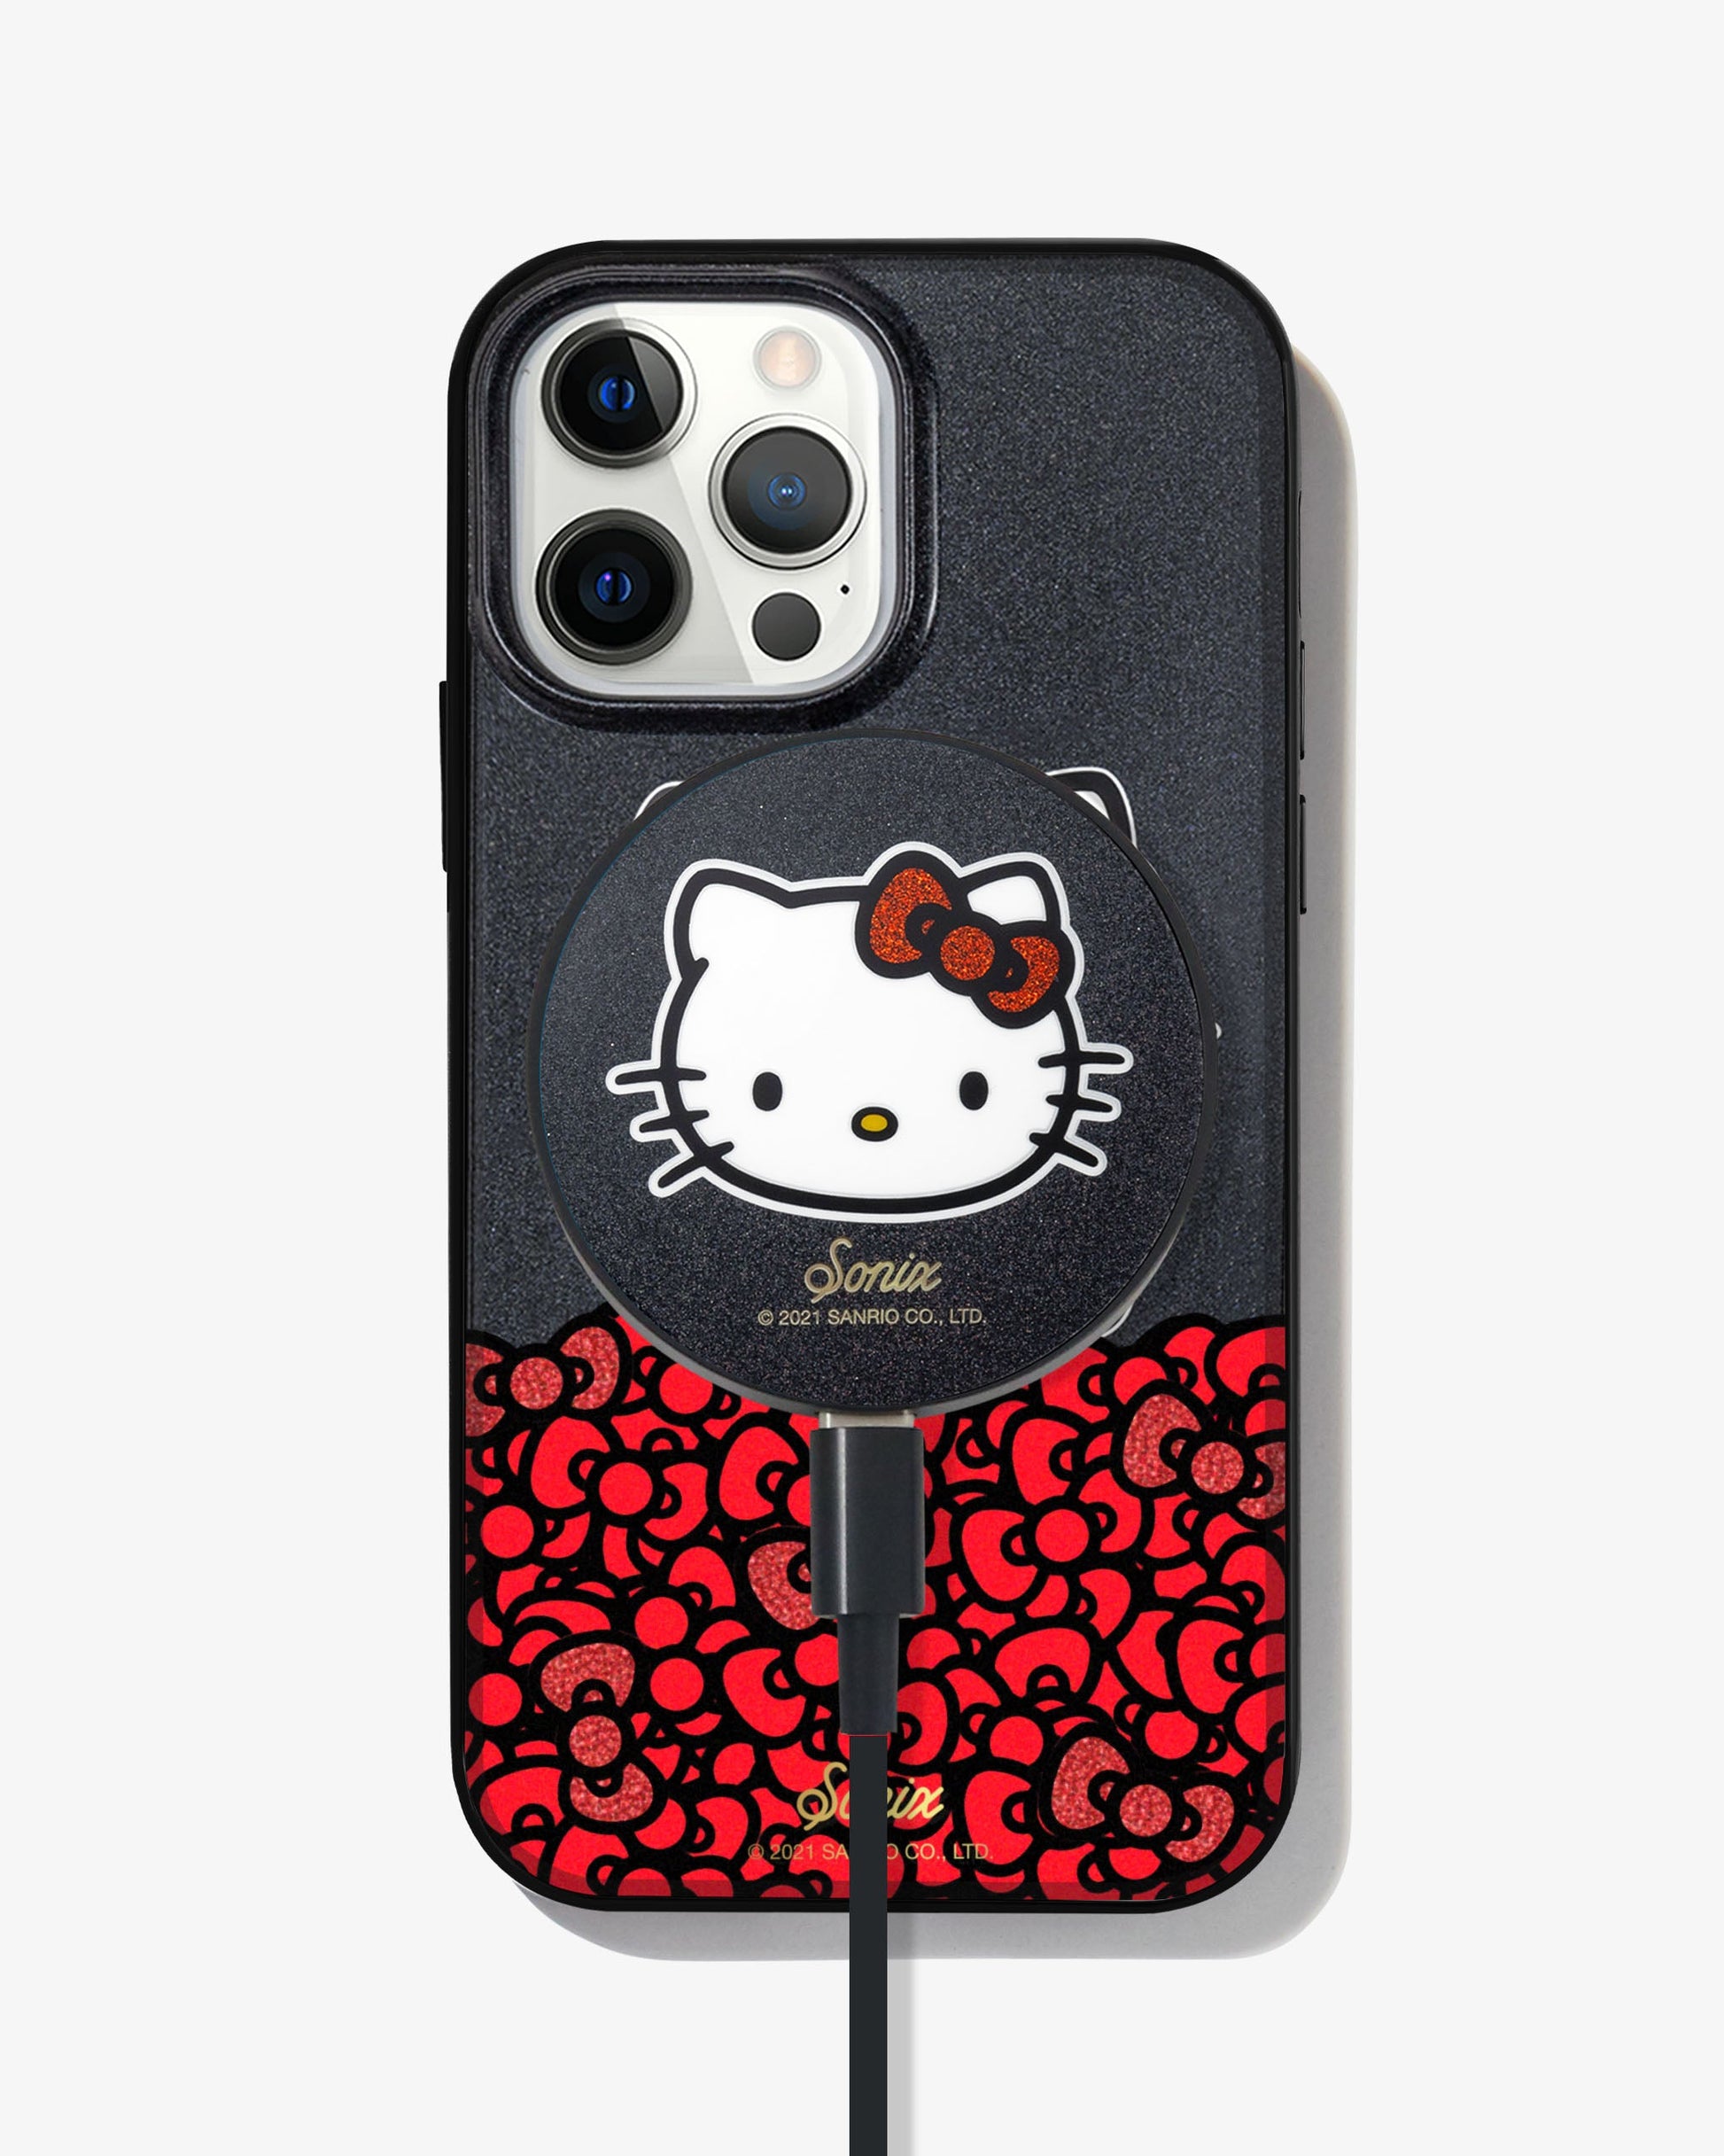 black glitter and Hello Kitty sitting on a bundle of her iconic red bows shown on a iphone 12 pro with a hello kitty magnetic link charger attached to the back 